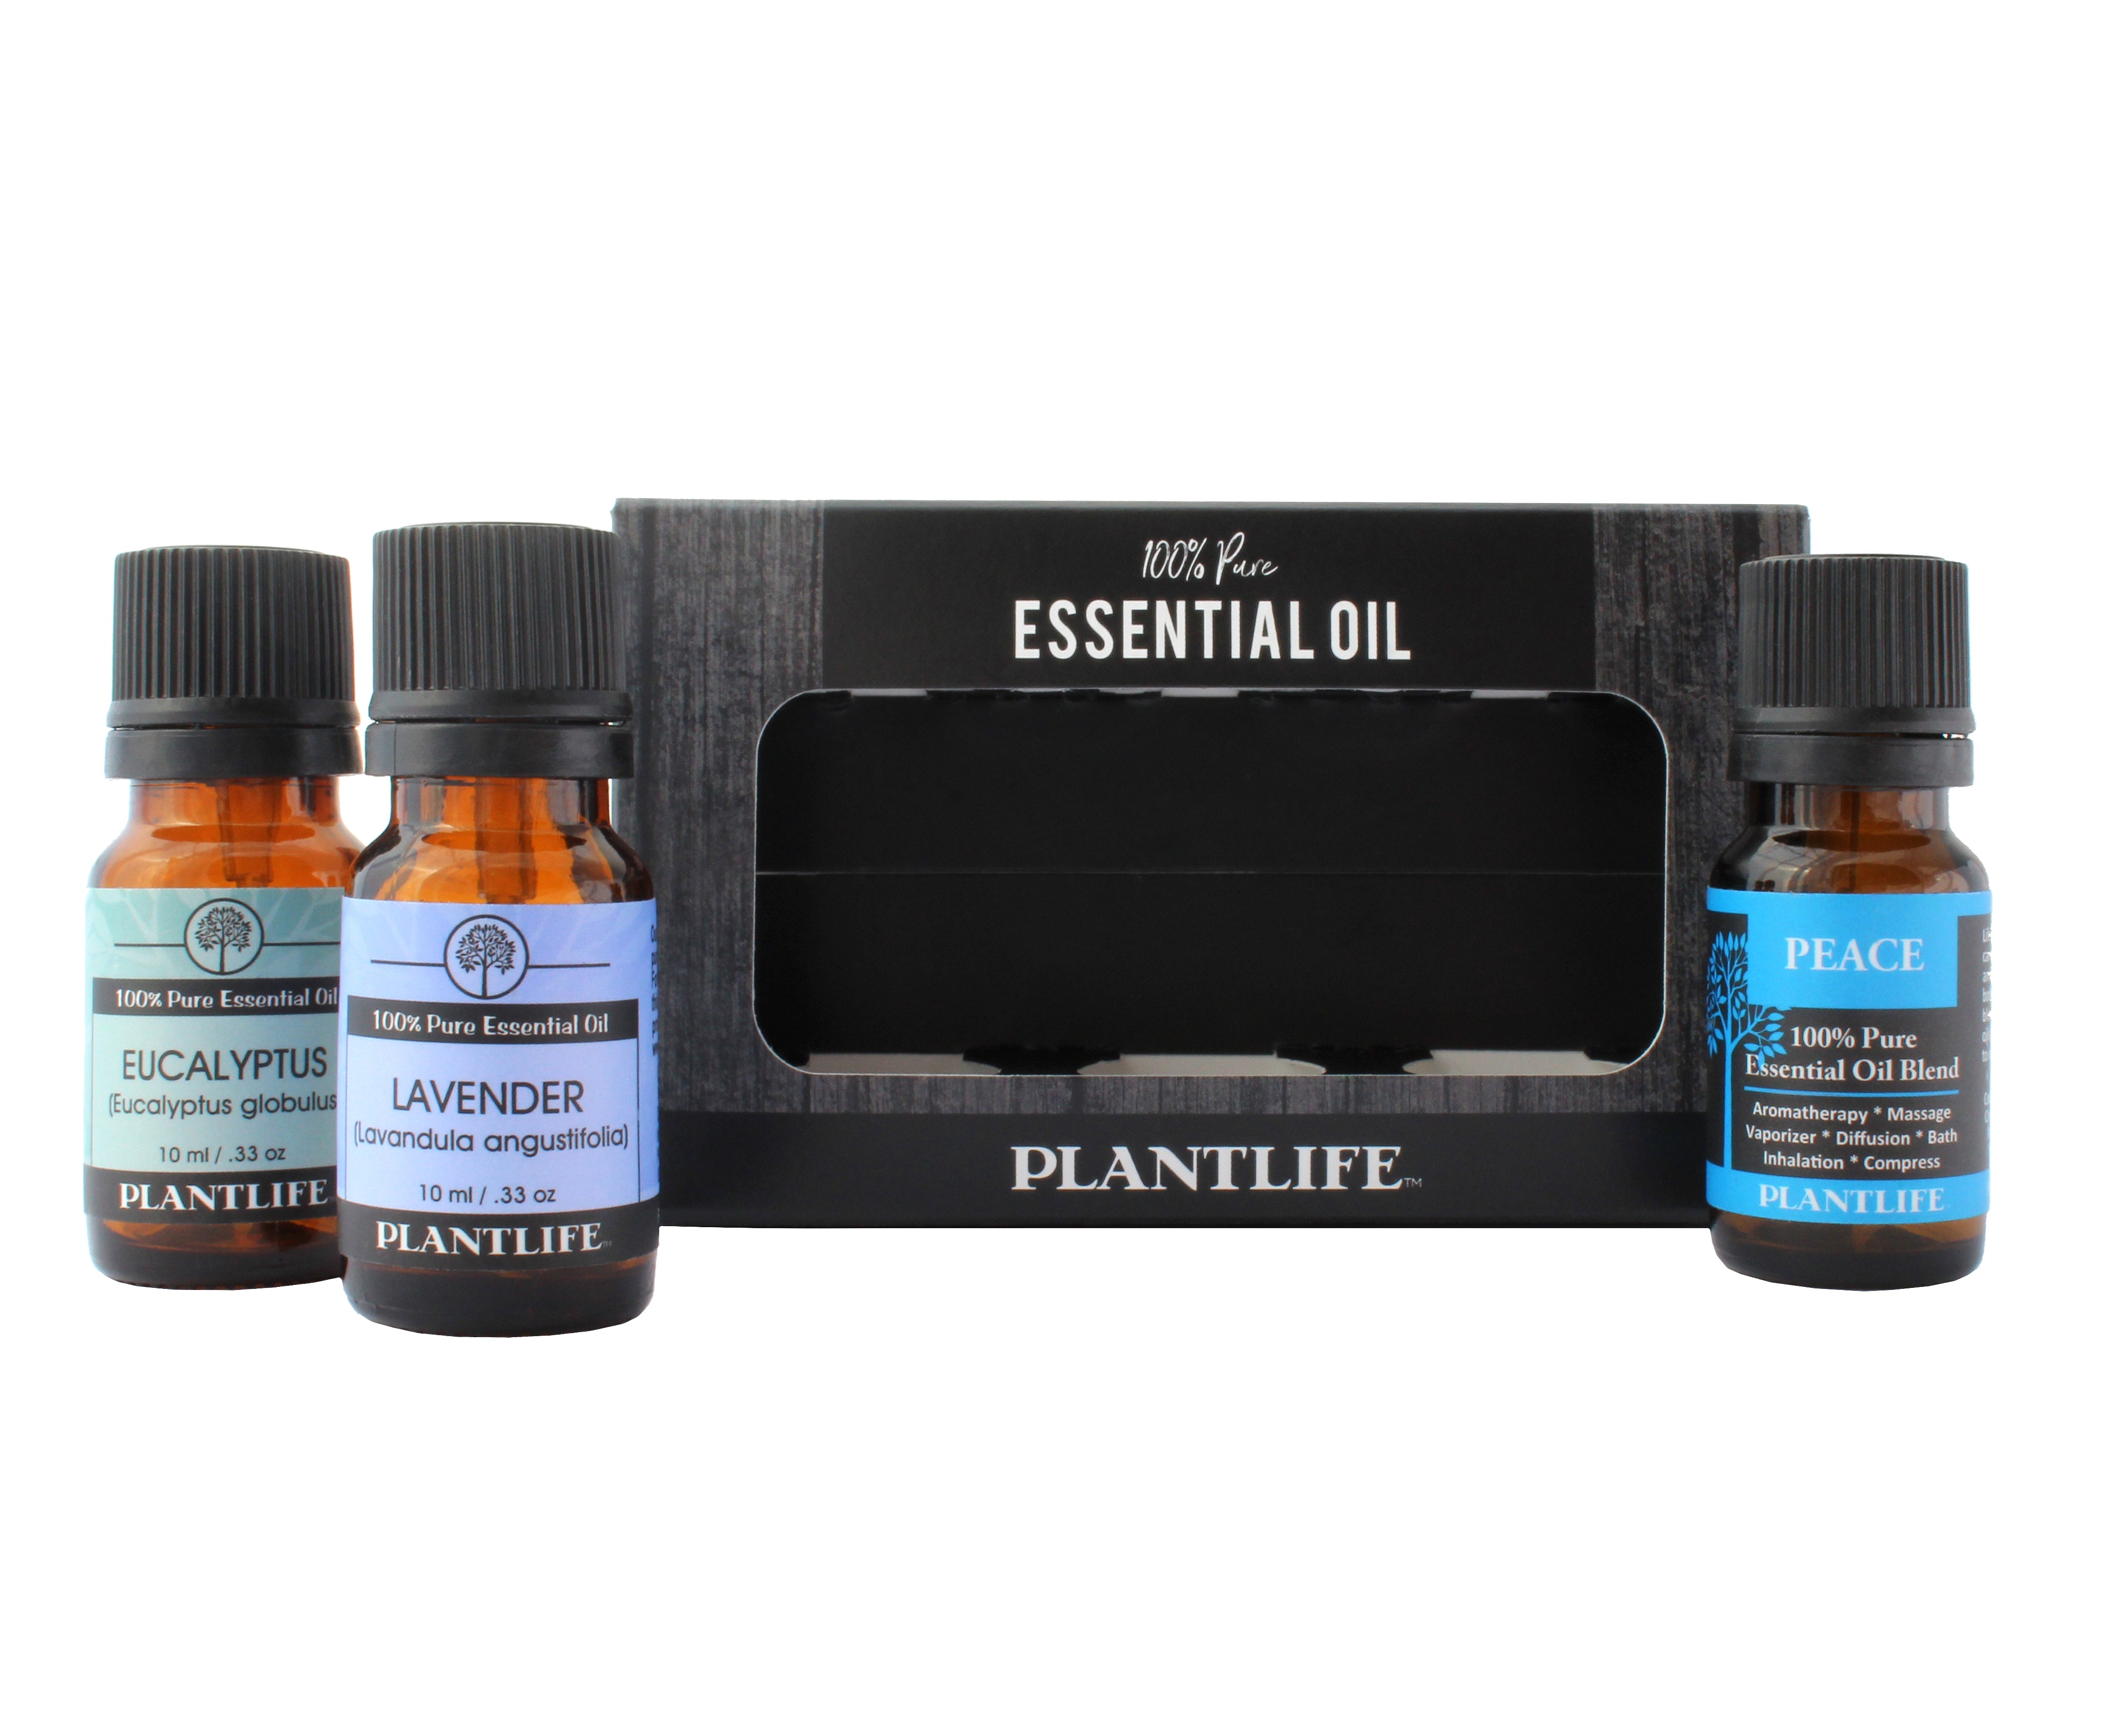 100% Pure Lavender Essential Oil - Get 20% OFF on All Essential Oils